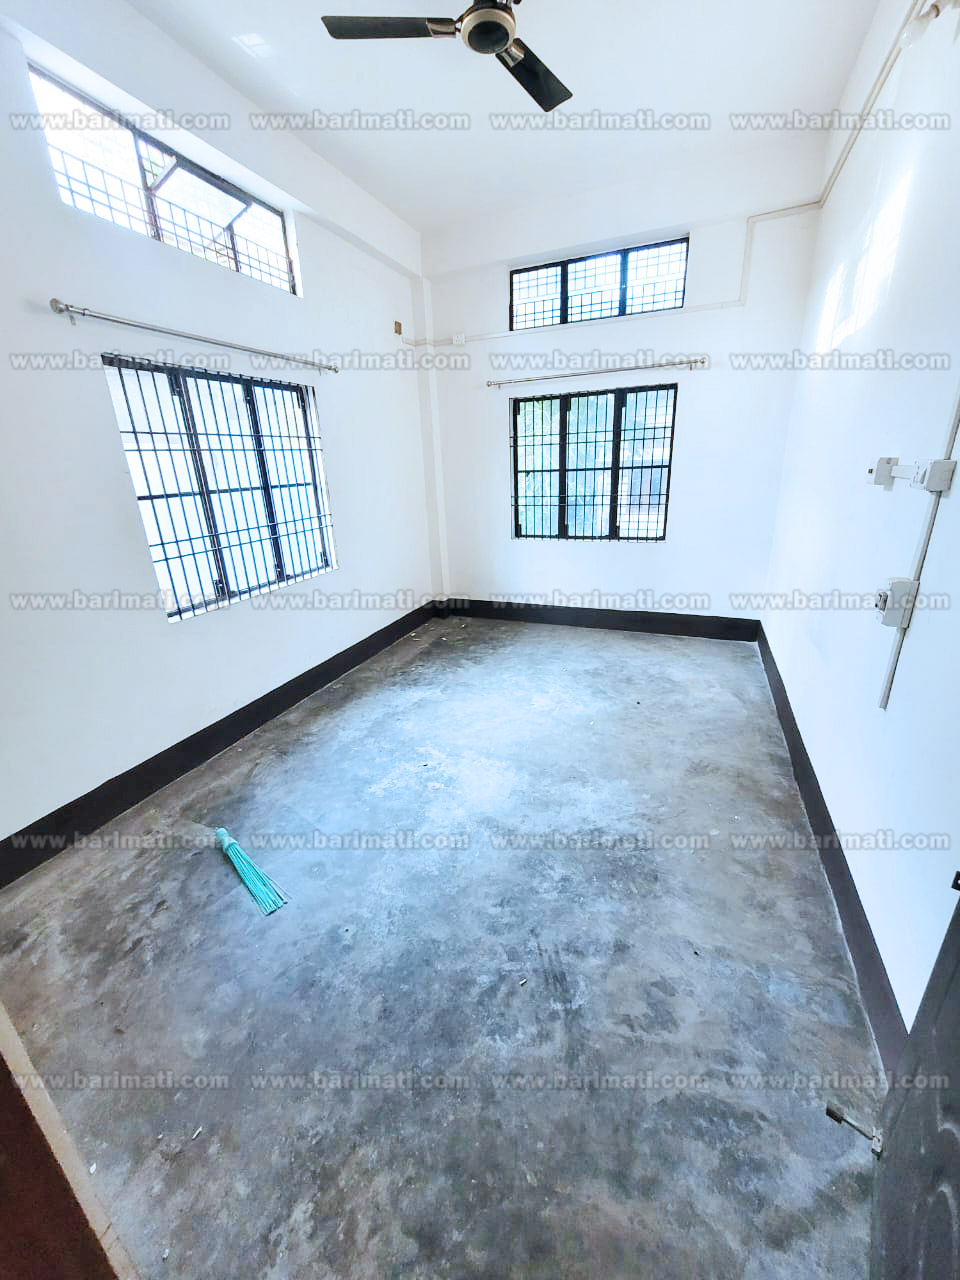 Cozy 2 BHK rental home in the heart of Amolapatty, Dibrugarh, available for lease under 9000 for a comfortable lifestyle